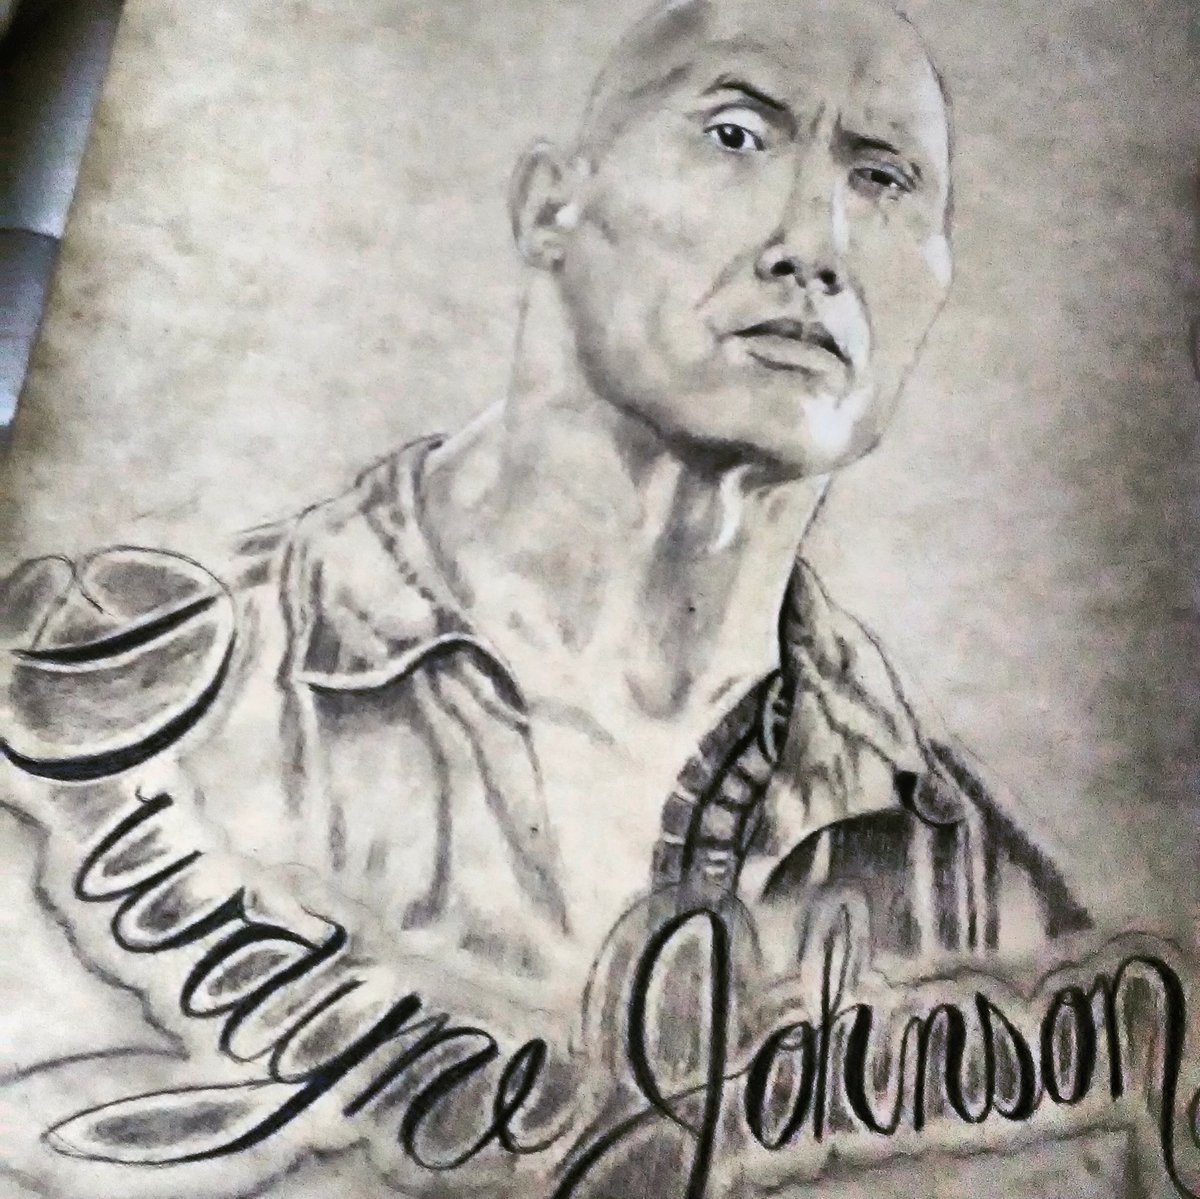 Done with@therock  #art #artist #draw #drawing #drawings #artwork #sketch #sketches #boxing  #therock   #dawaynejohnson @wwenetwork @publishnfeatureart @art_4world @arts_drawings_1 @arts2love @art. @tamster_c @maas.